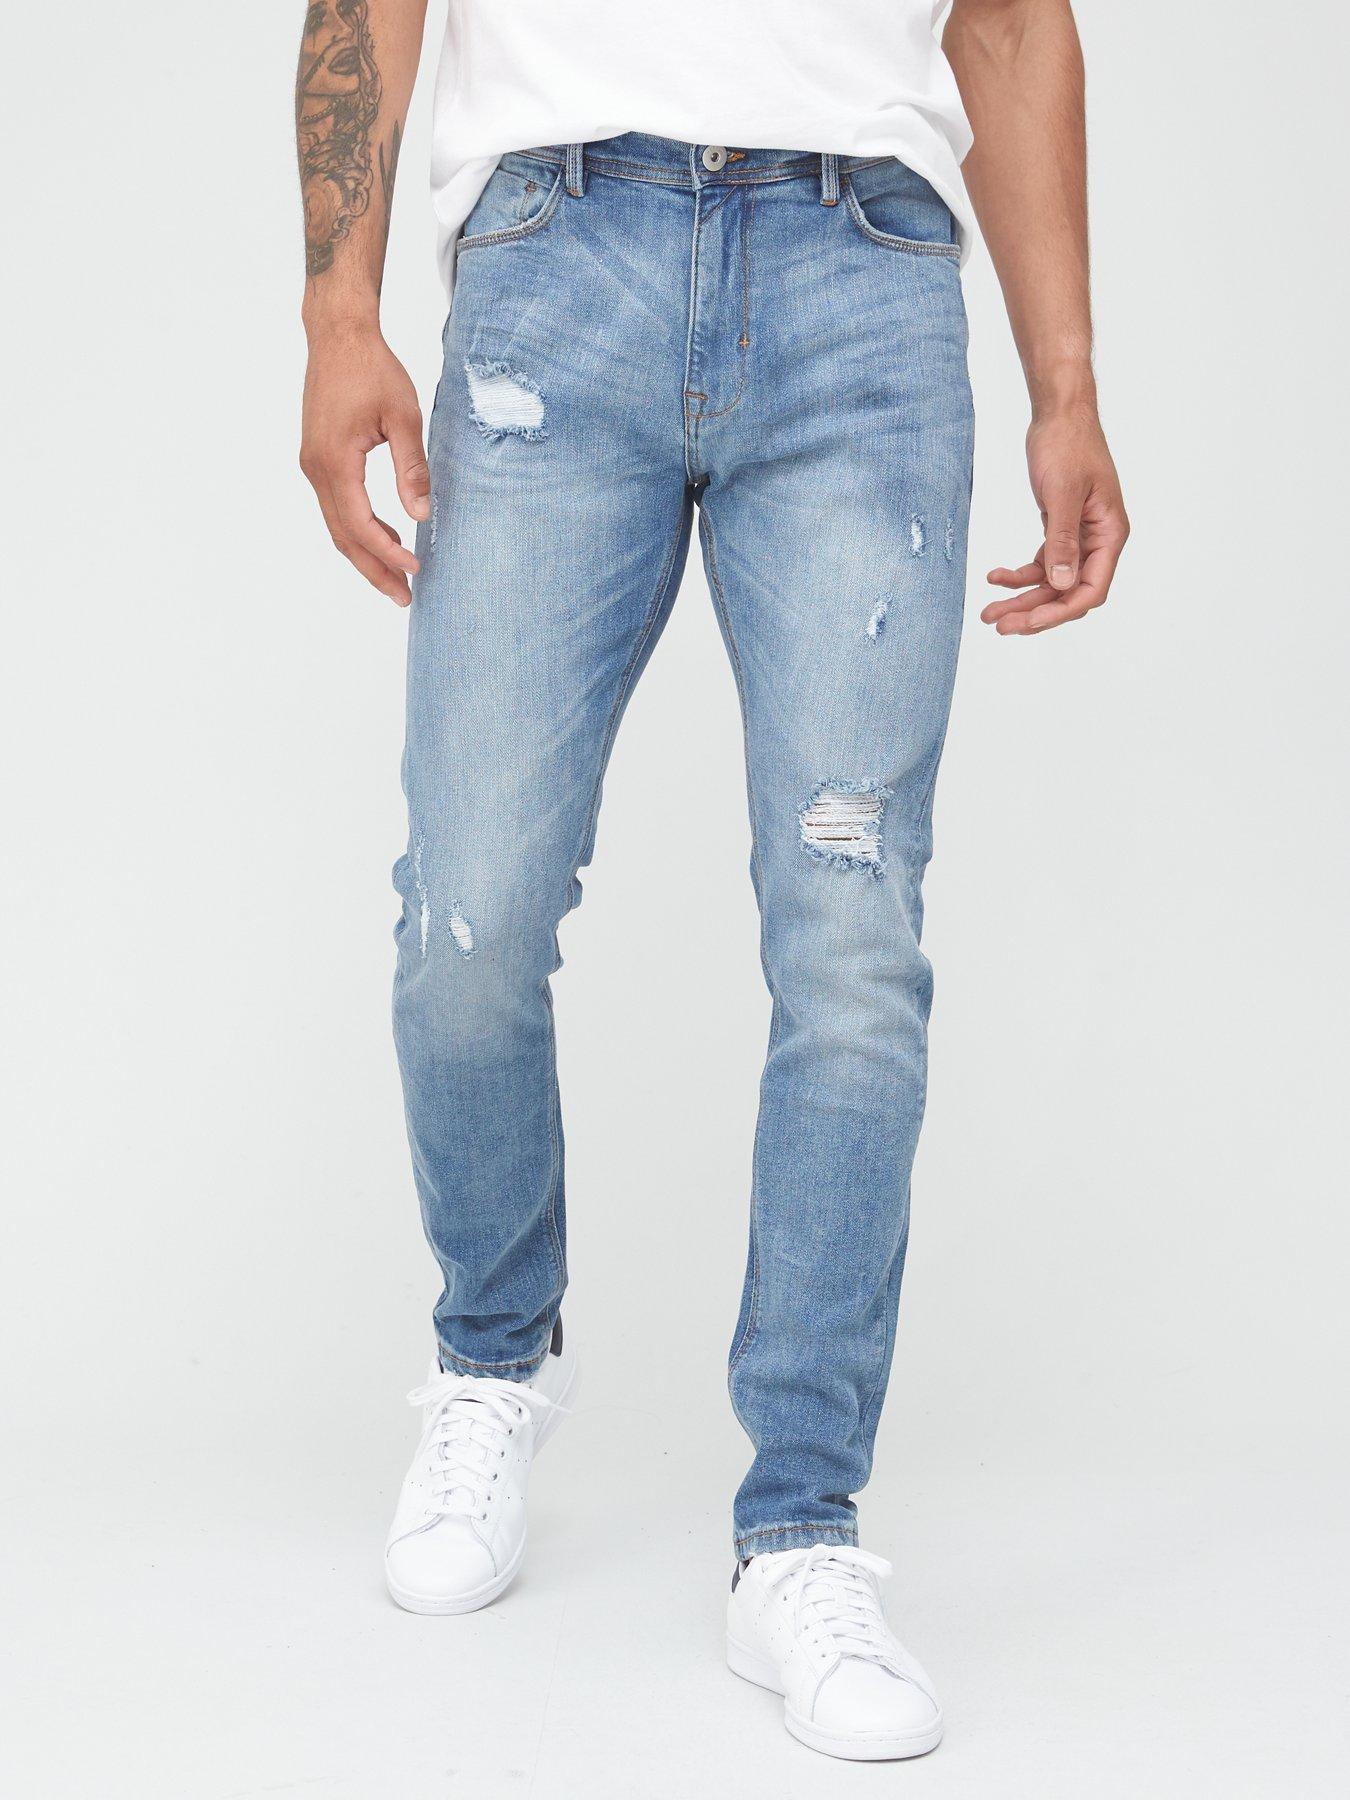 Very Man Skinny Jeans with Stretch - Vintage Mid Blue Wash | very.co.uk